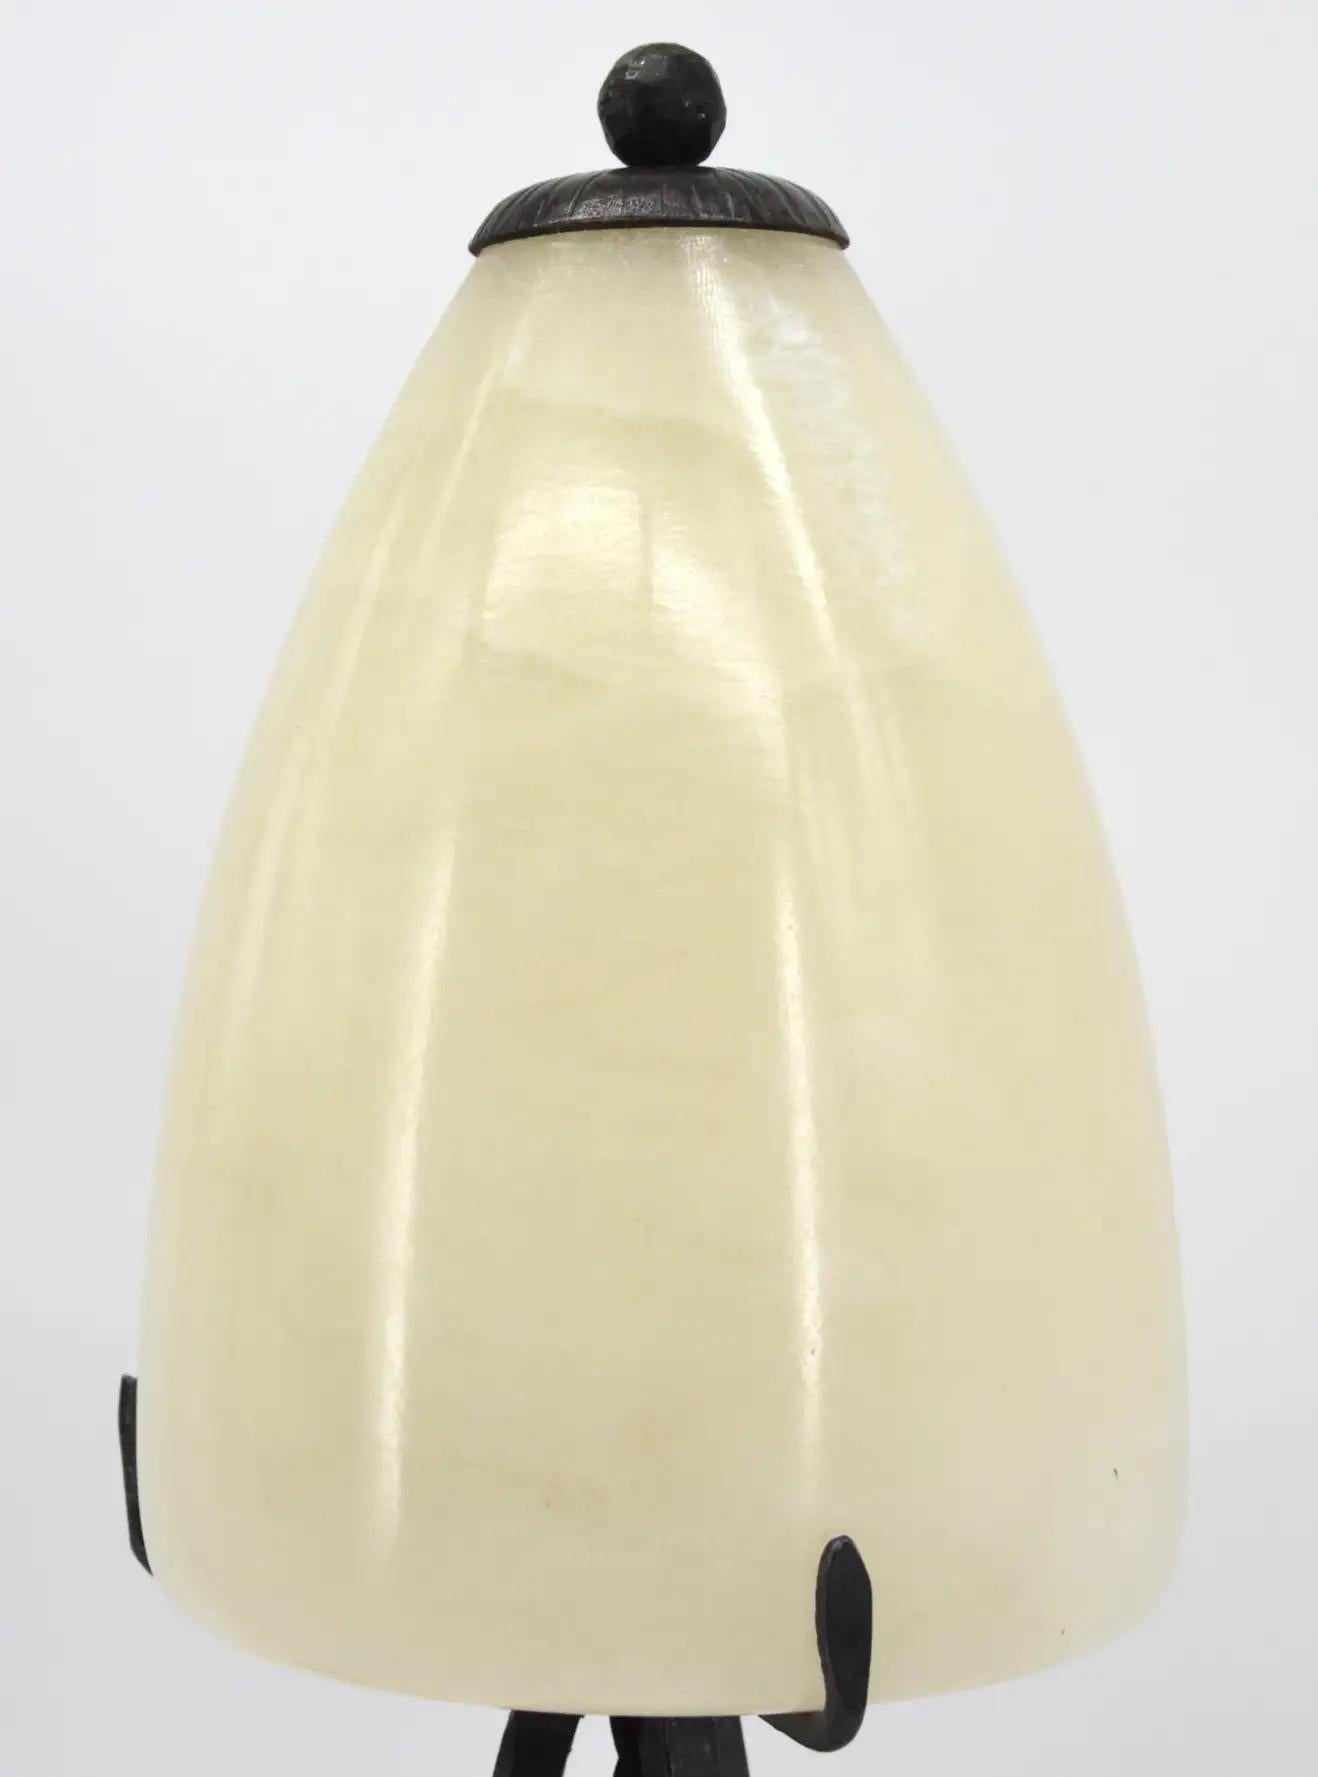 Wrought Iron French Art Deco Alabaster Table Lamp, 1920s For Sale